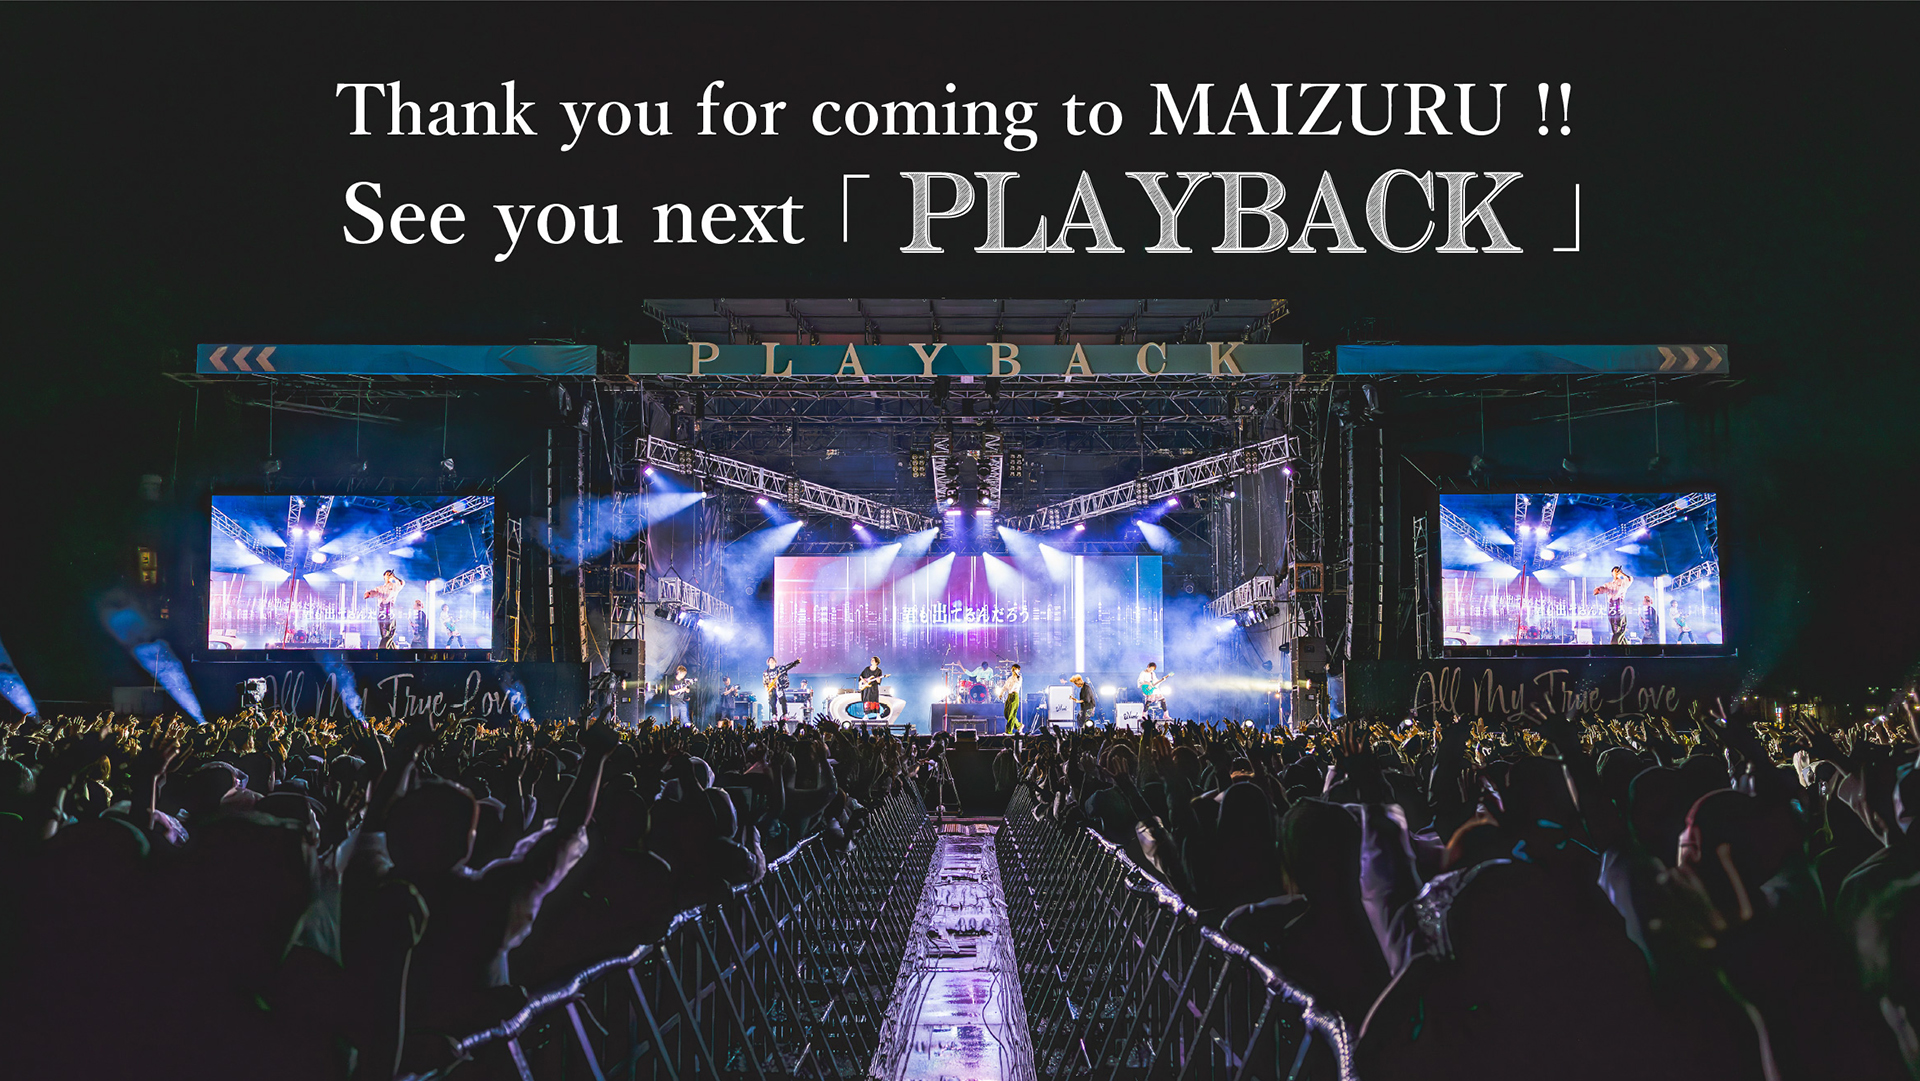 Thank you for coming to Maizuru!! See you next 「PLAYBACK」